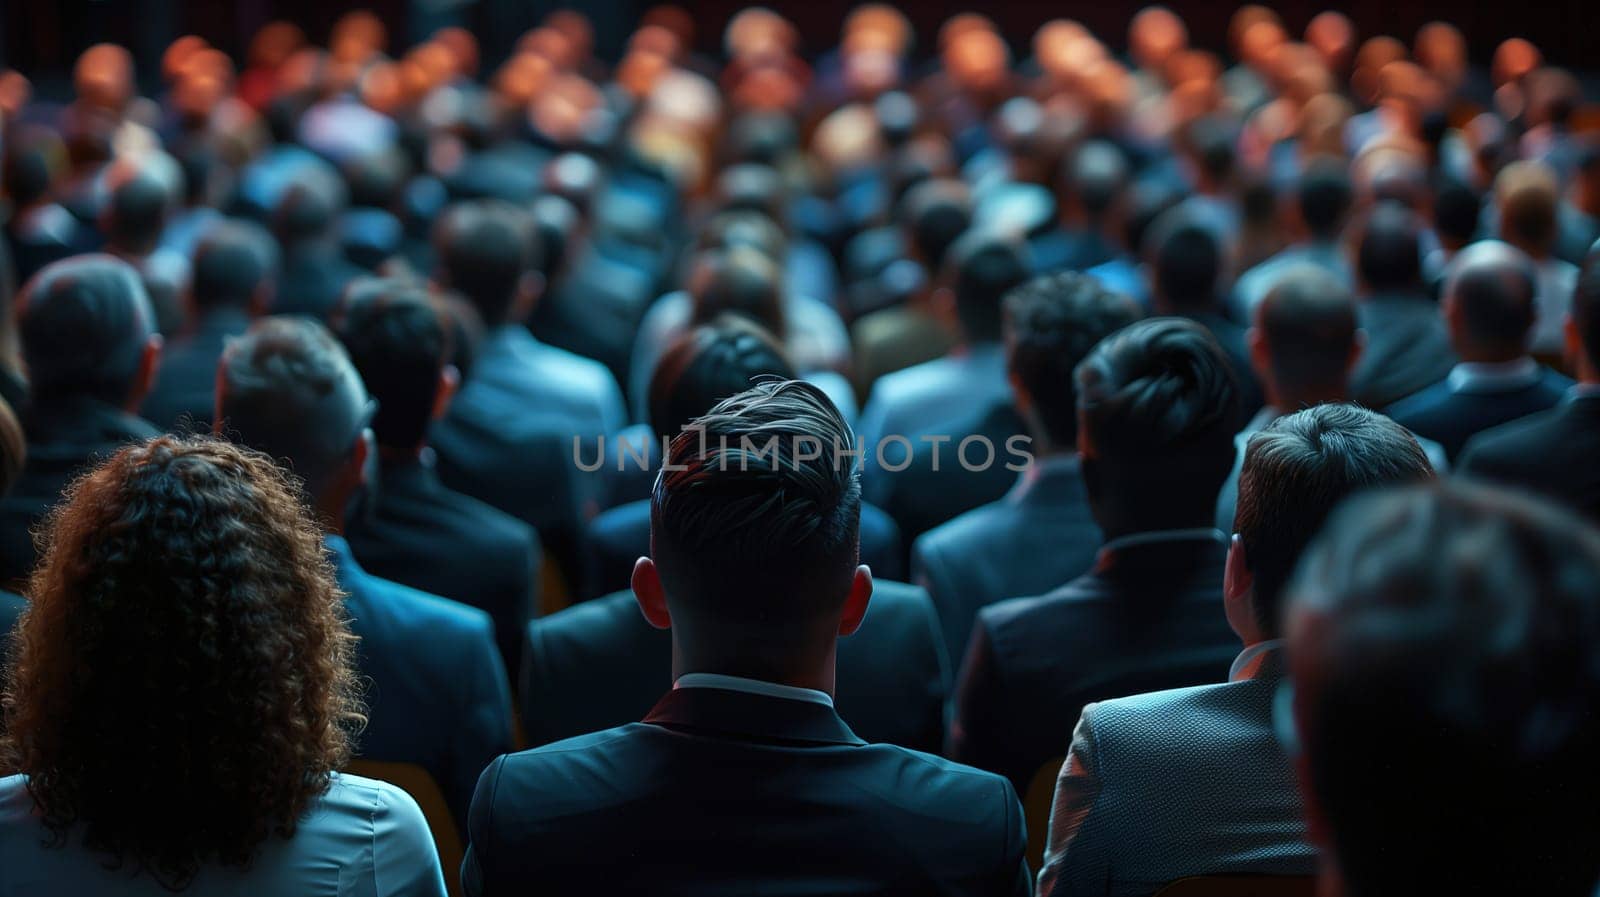 A gathered crowd of professionals sits attentively in a conference hall, facing the direction of a speaker giving a keynote to a business audience. The focus suggests an environment of learning and networking during a corporate event.